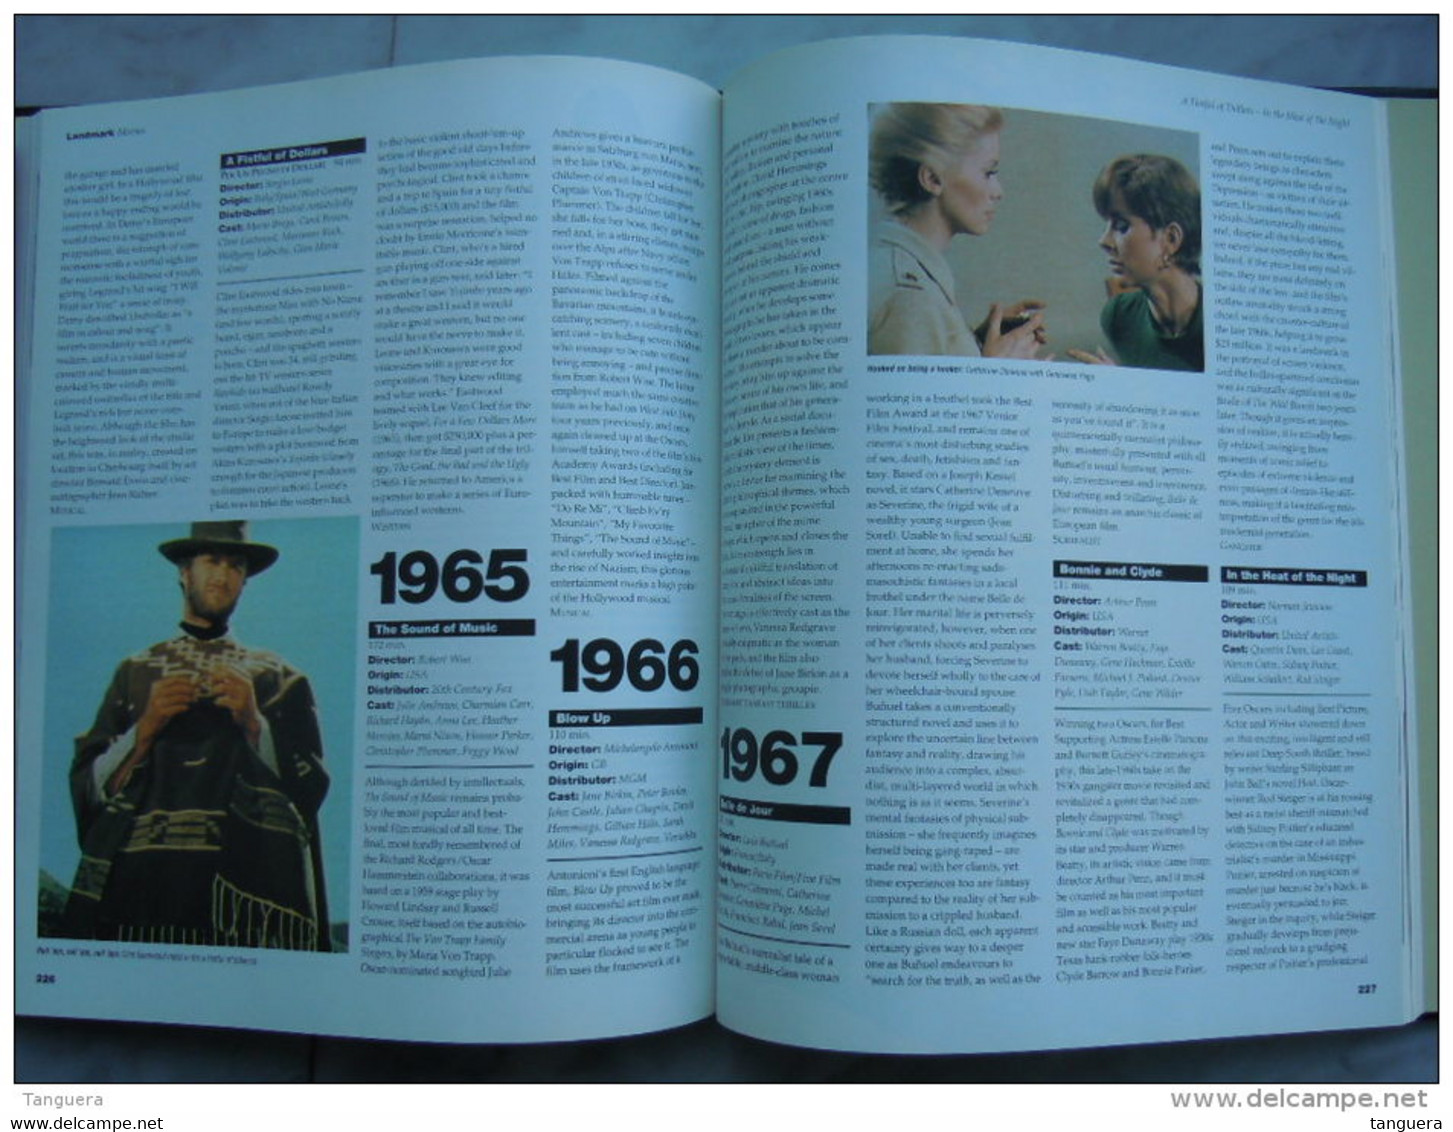 ENCYCLOPEDIA OF THE MOVIES History Till 1995 Published By Virgin - Kunst